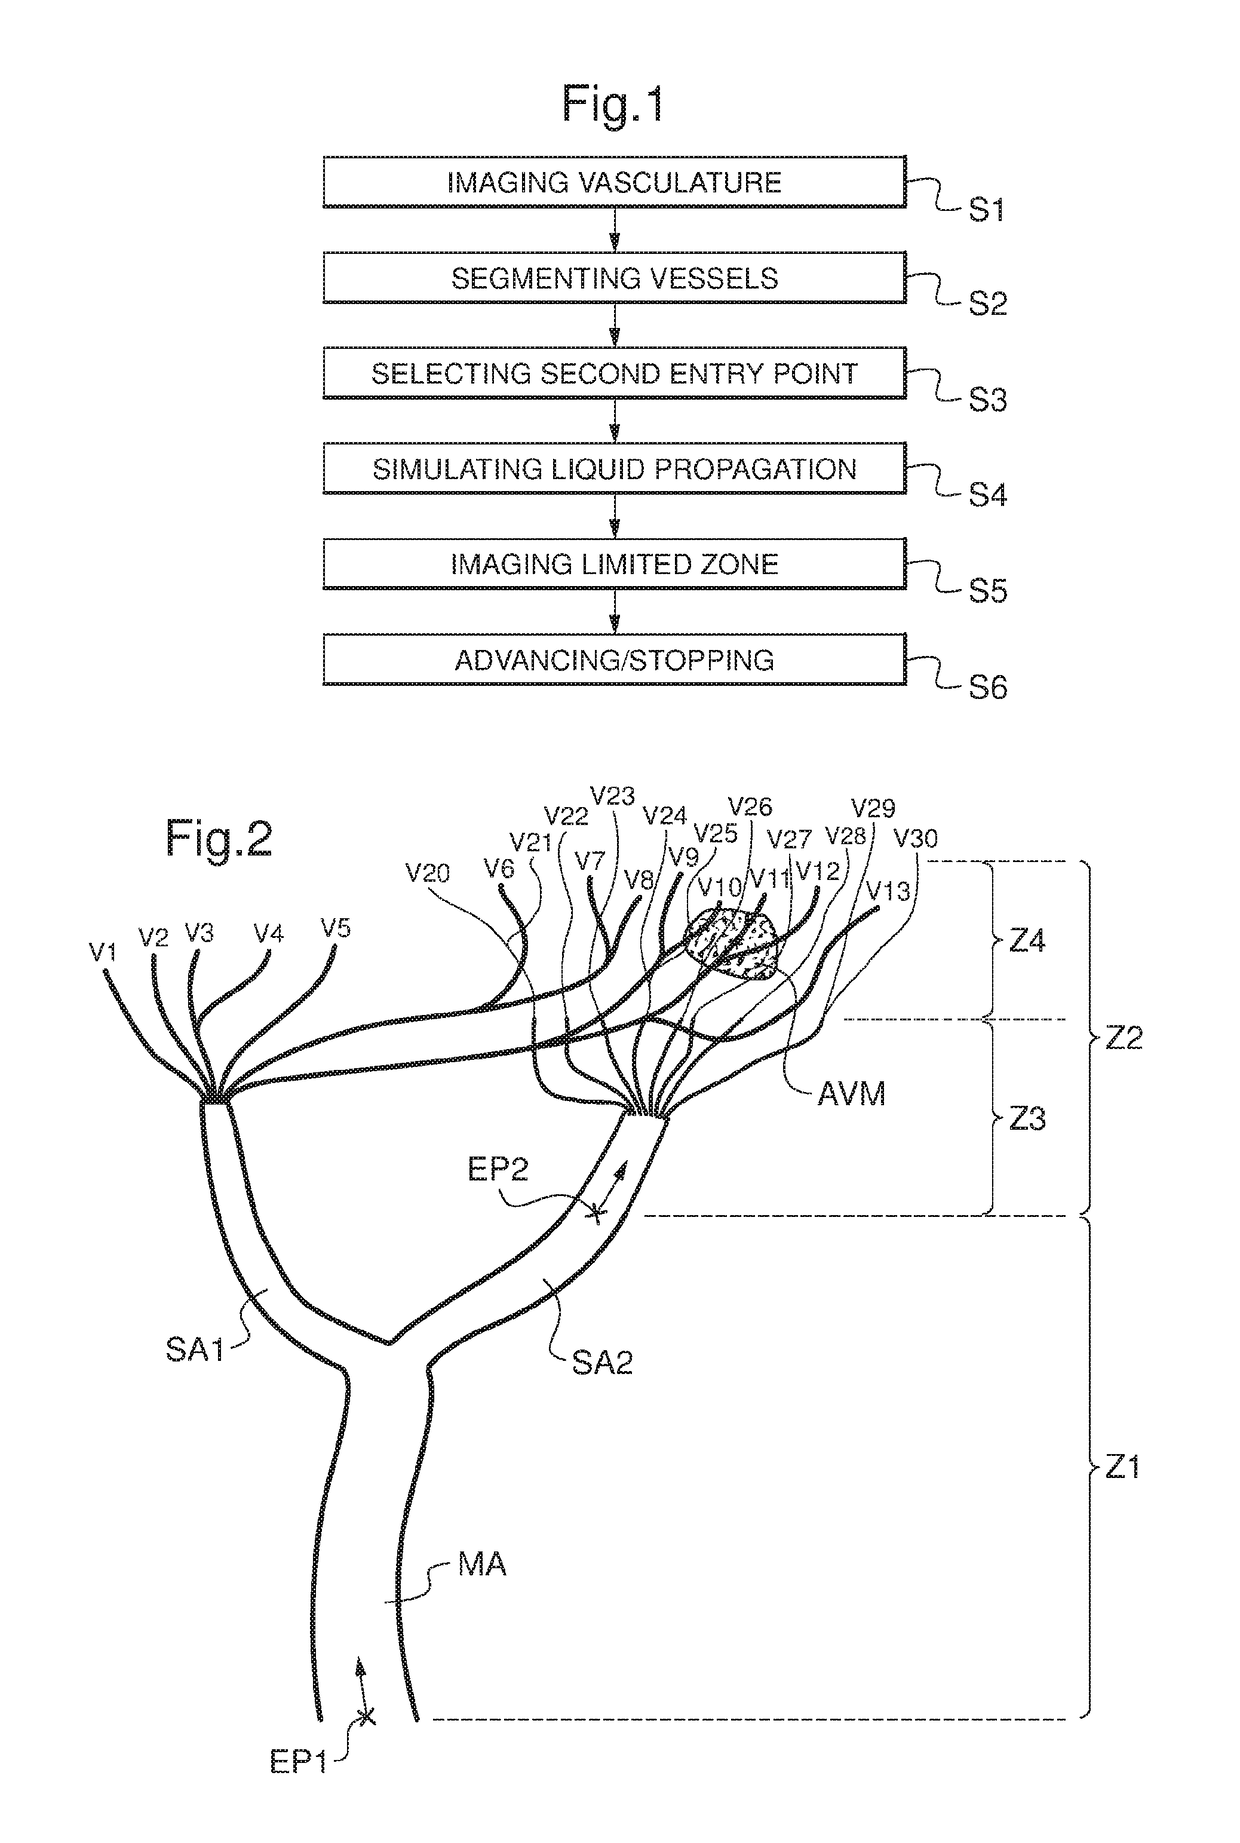 Three dimensional imaging method of a limited zone of a patient's vasculature